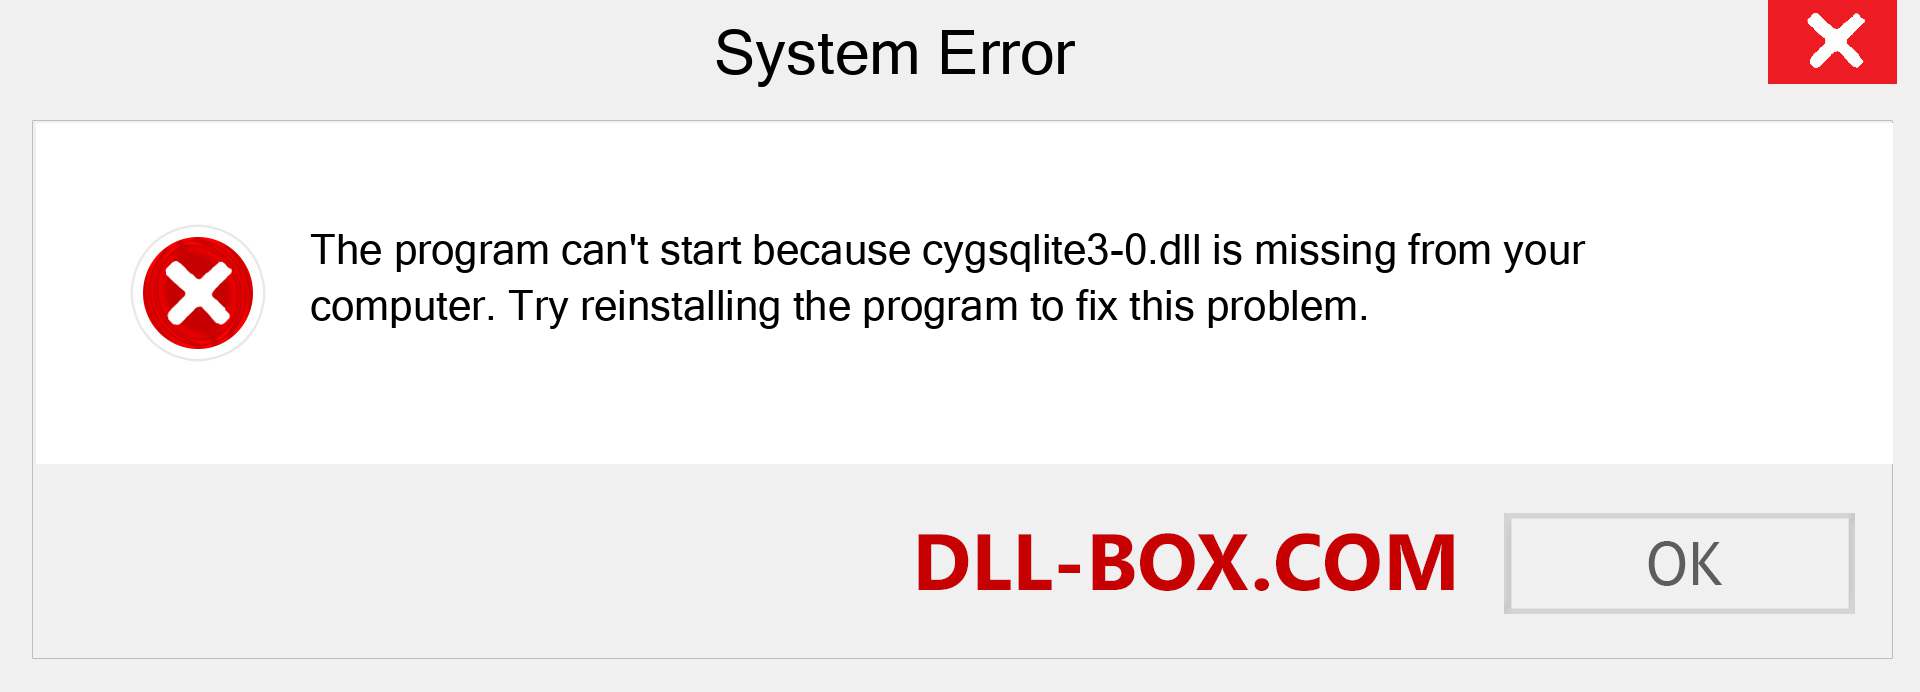  cygsqlite3-0.dll file is missing?. Download for Windows 7, 8, 10 - Fix  cygsqlite3-0 dll Missing Error on Windows, photos, images